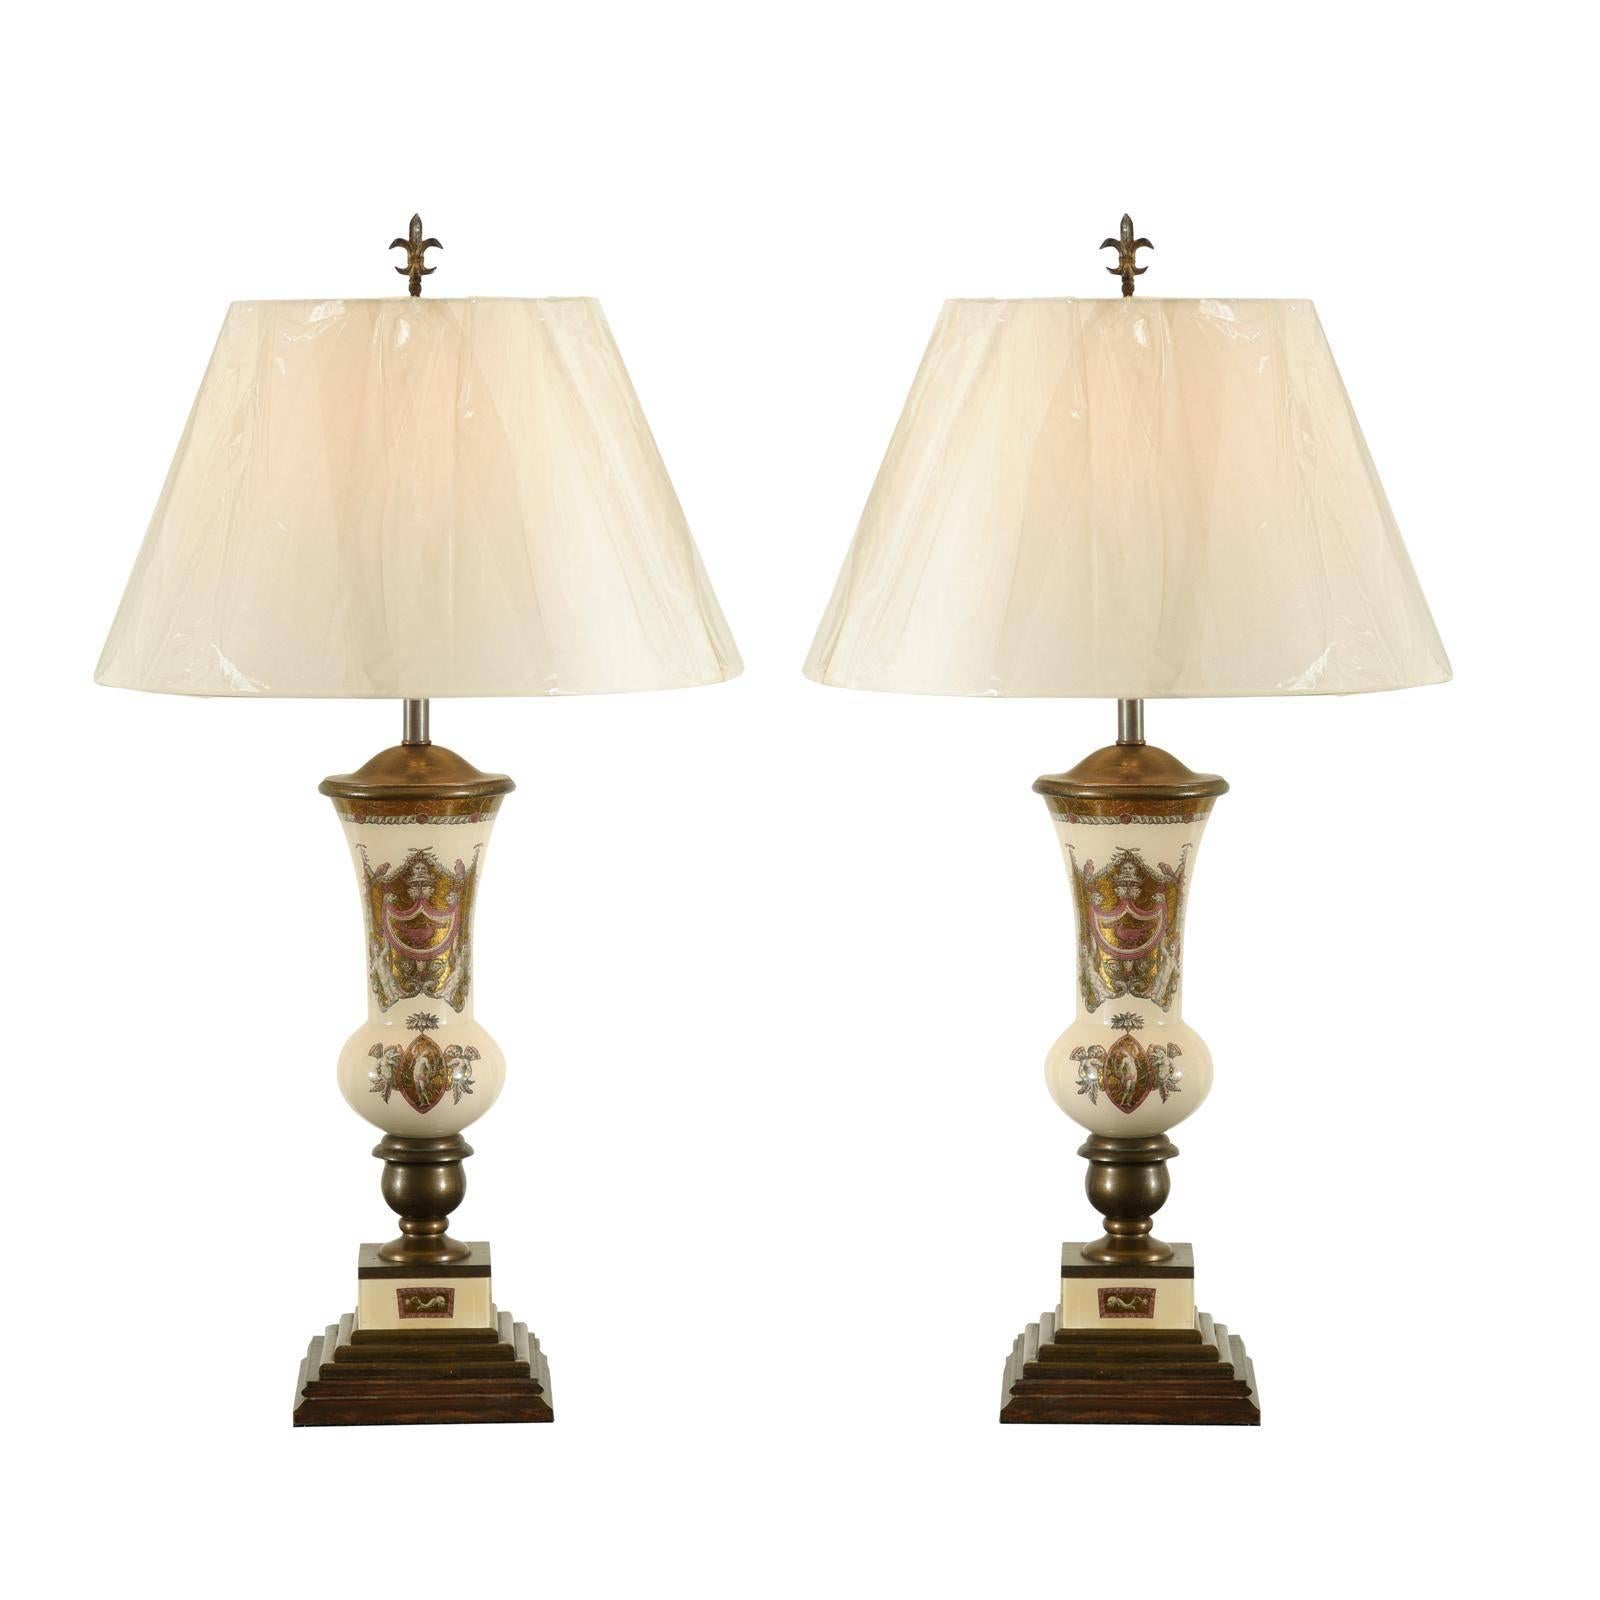 Remarkable Pair of Reverse Painted Lamps in the Style of Piero Fornasetti For Sale